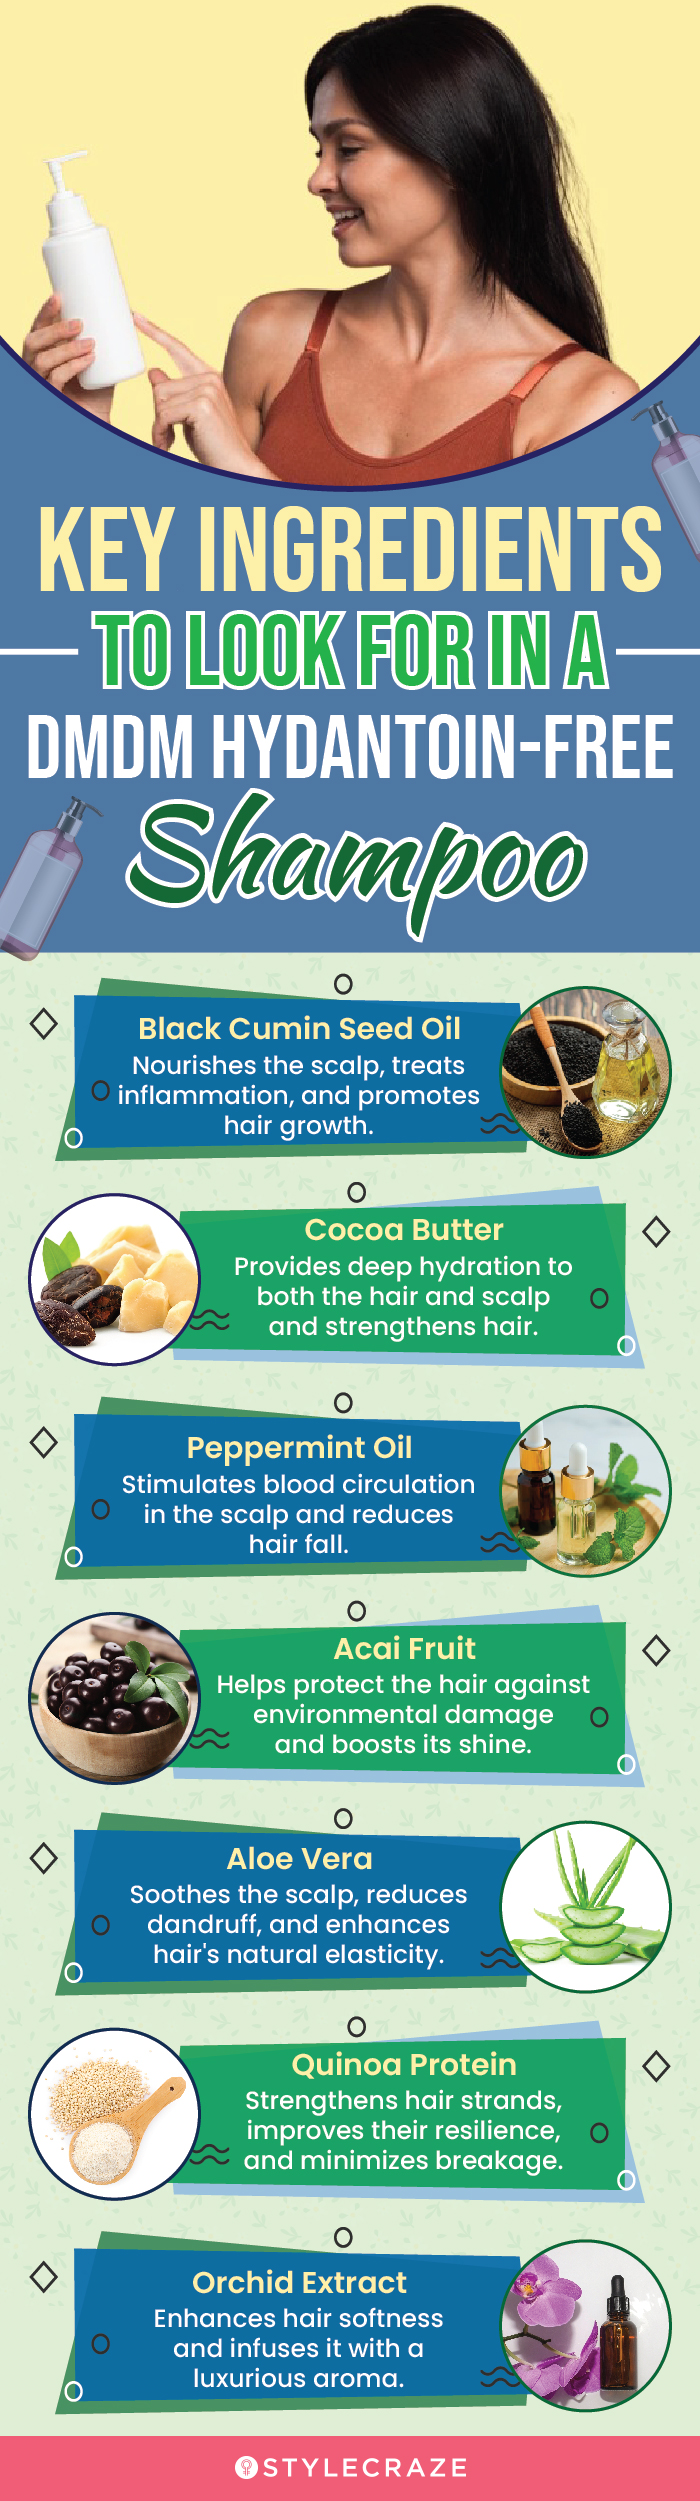 Key Ingredients To Look For In A DMDM Hydantoin-Free Shampoo (infographic)